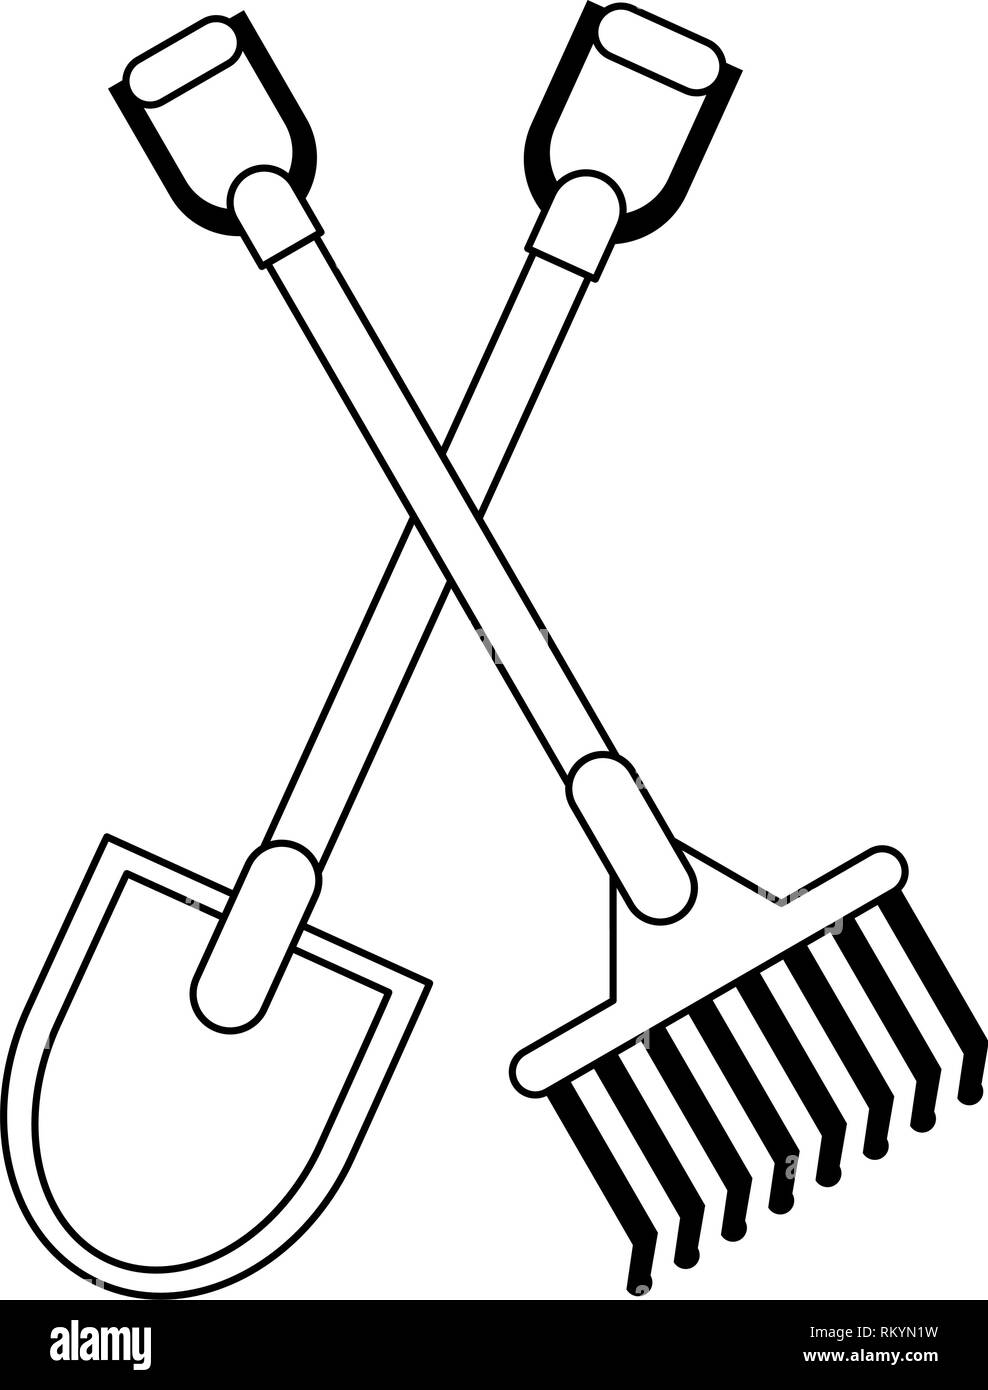 Harvest Clip Art Black And White | mikespike123